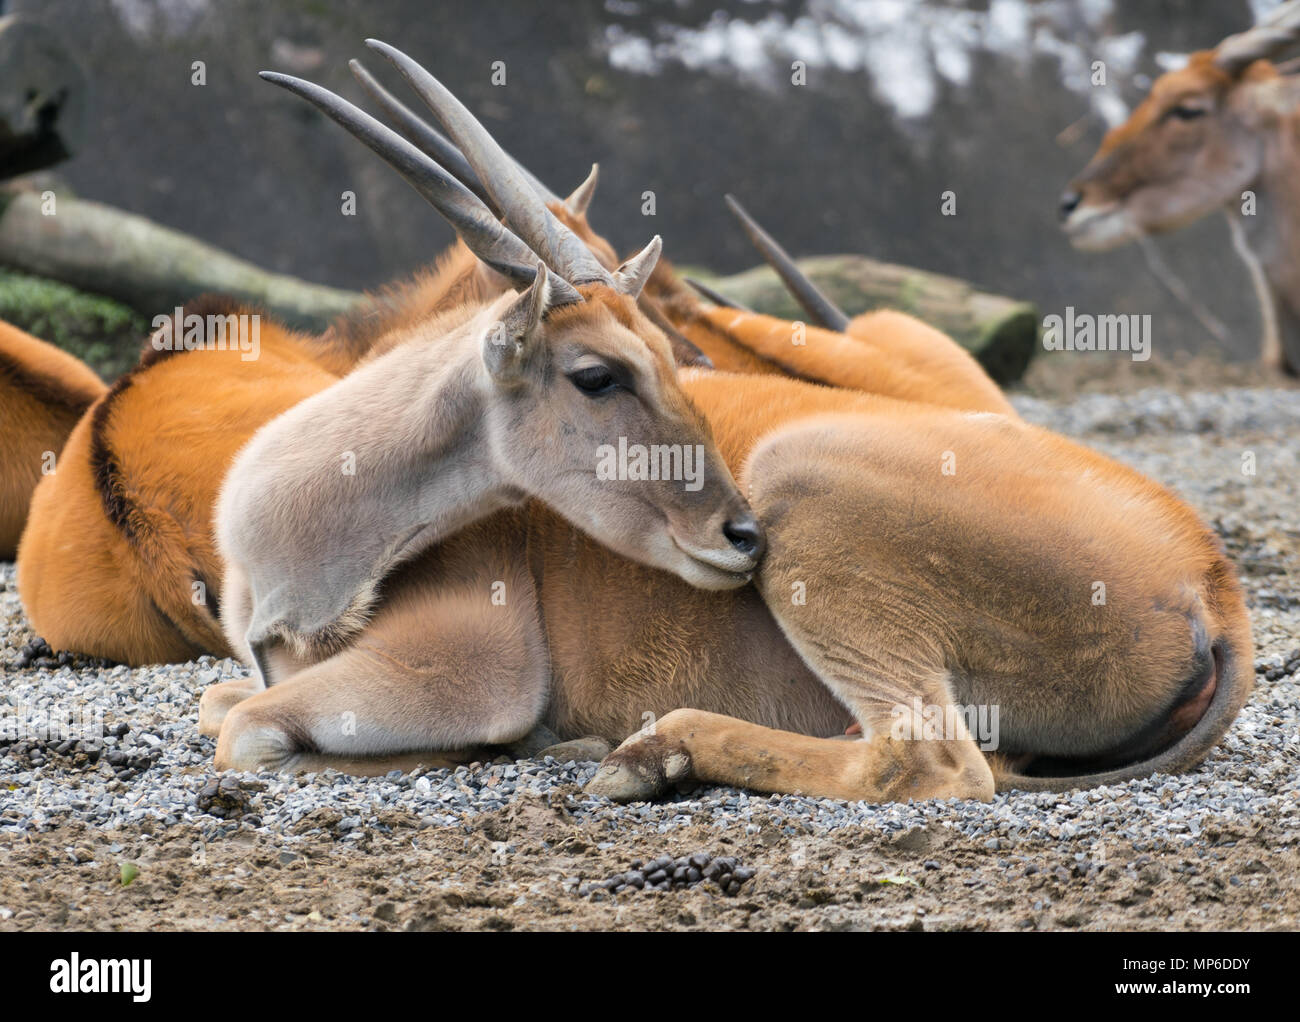 African Common southern eland antelope or taurotragus oryx Stock Photo